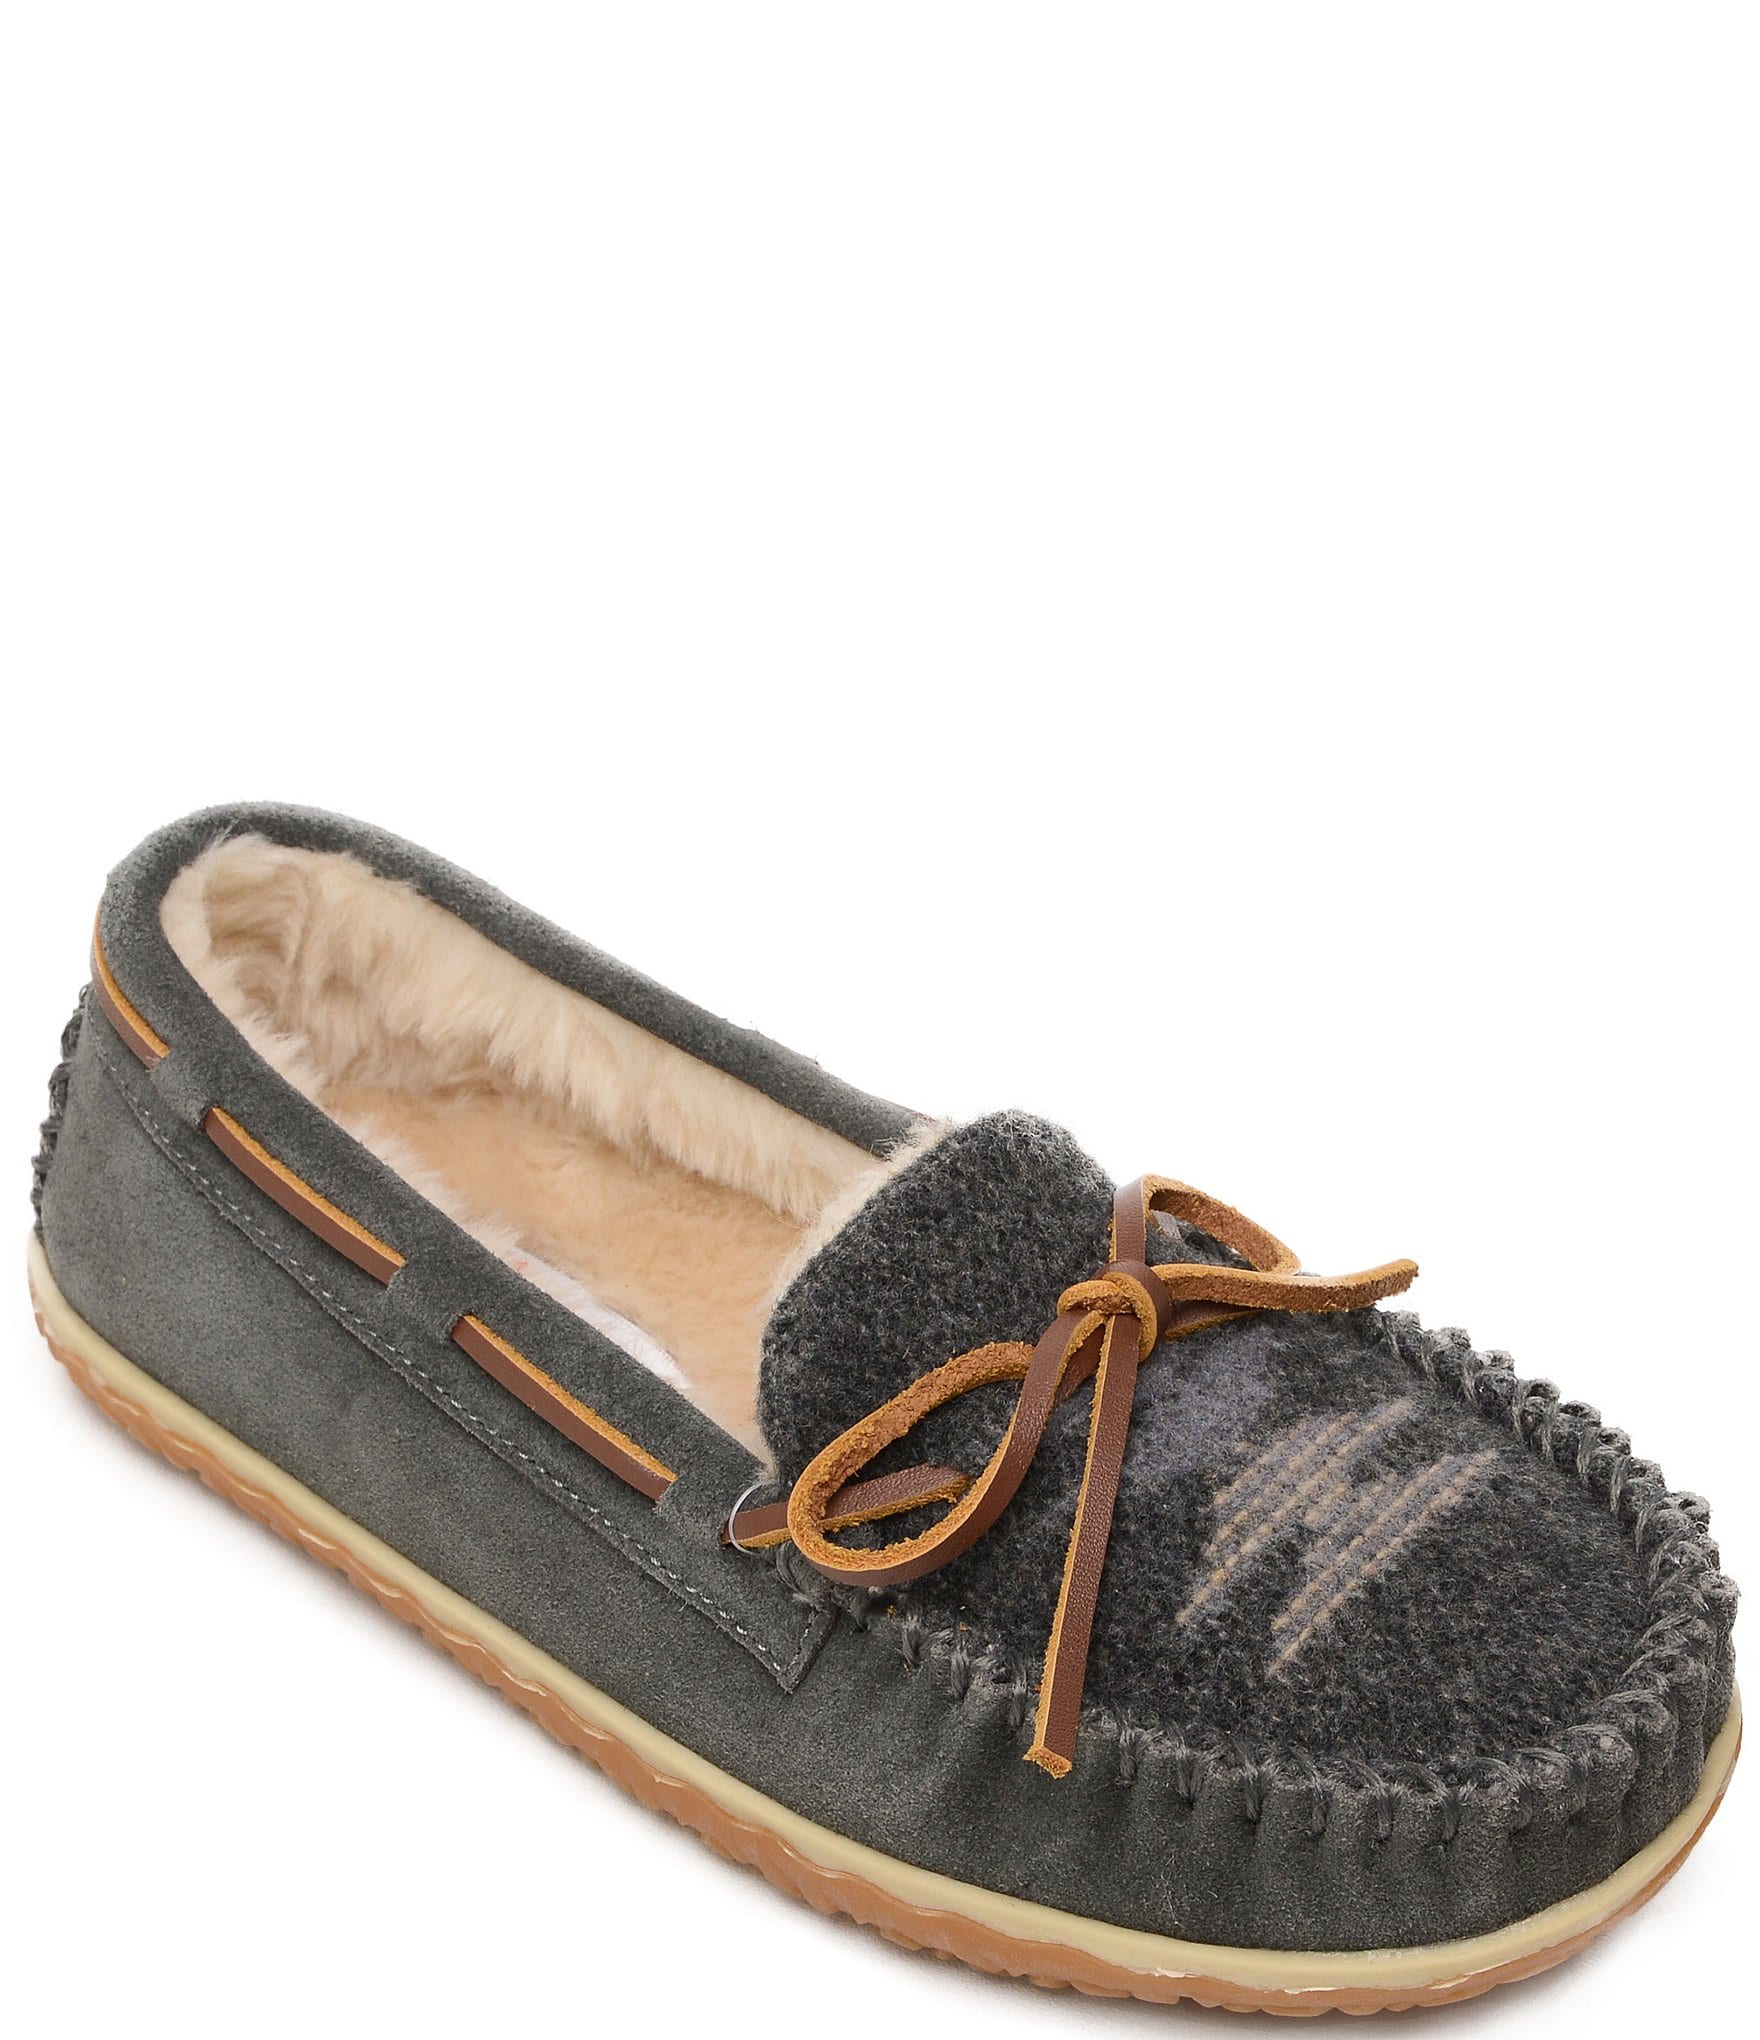 Women's Moccasins and Loafer Slippers